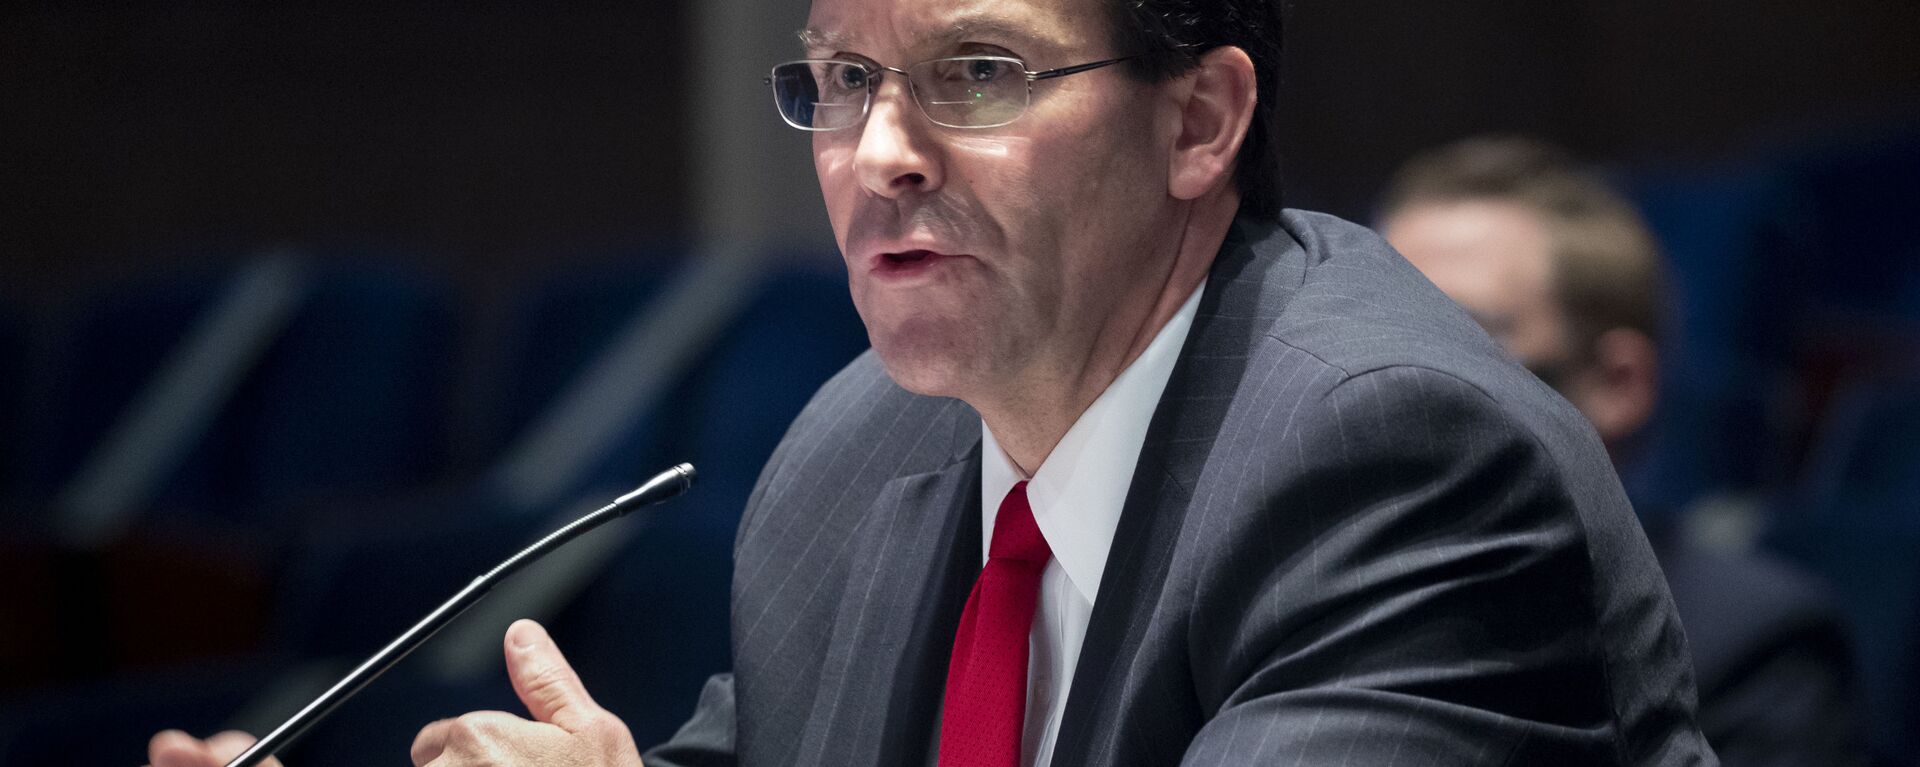 Defense Secretary Mark Esper testifies during a House Armed Services Committee hearing on Thursday, July 9, 2020, on Capitol Hill in Washington. - Sputnik International, 1920, 29.08.2020